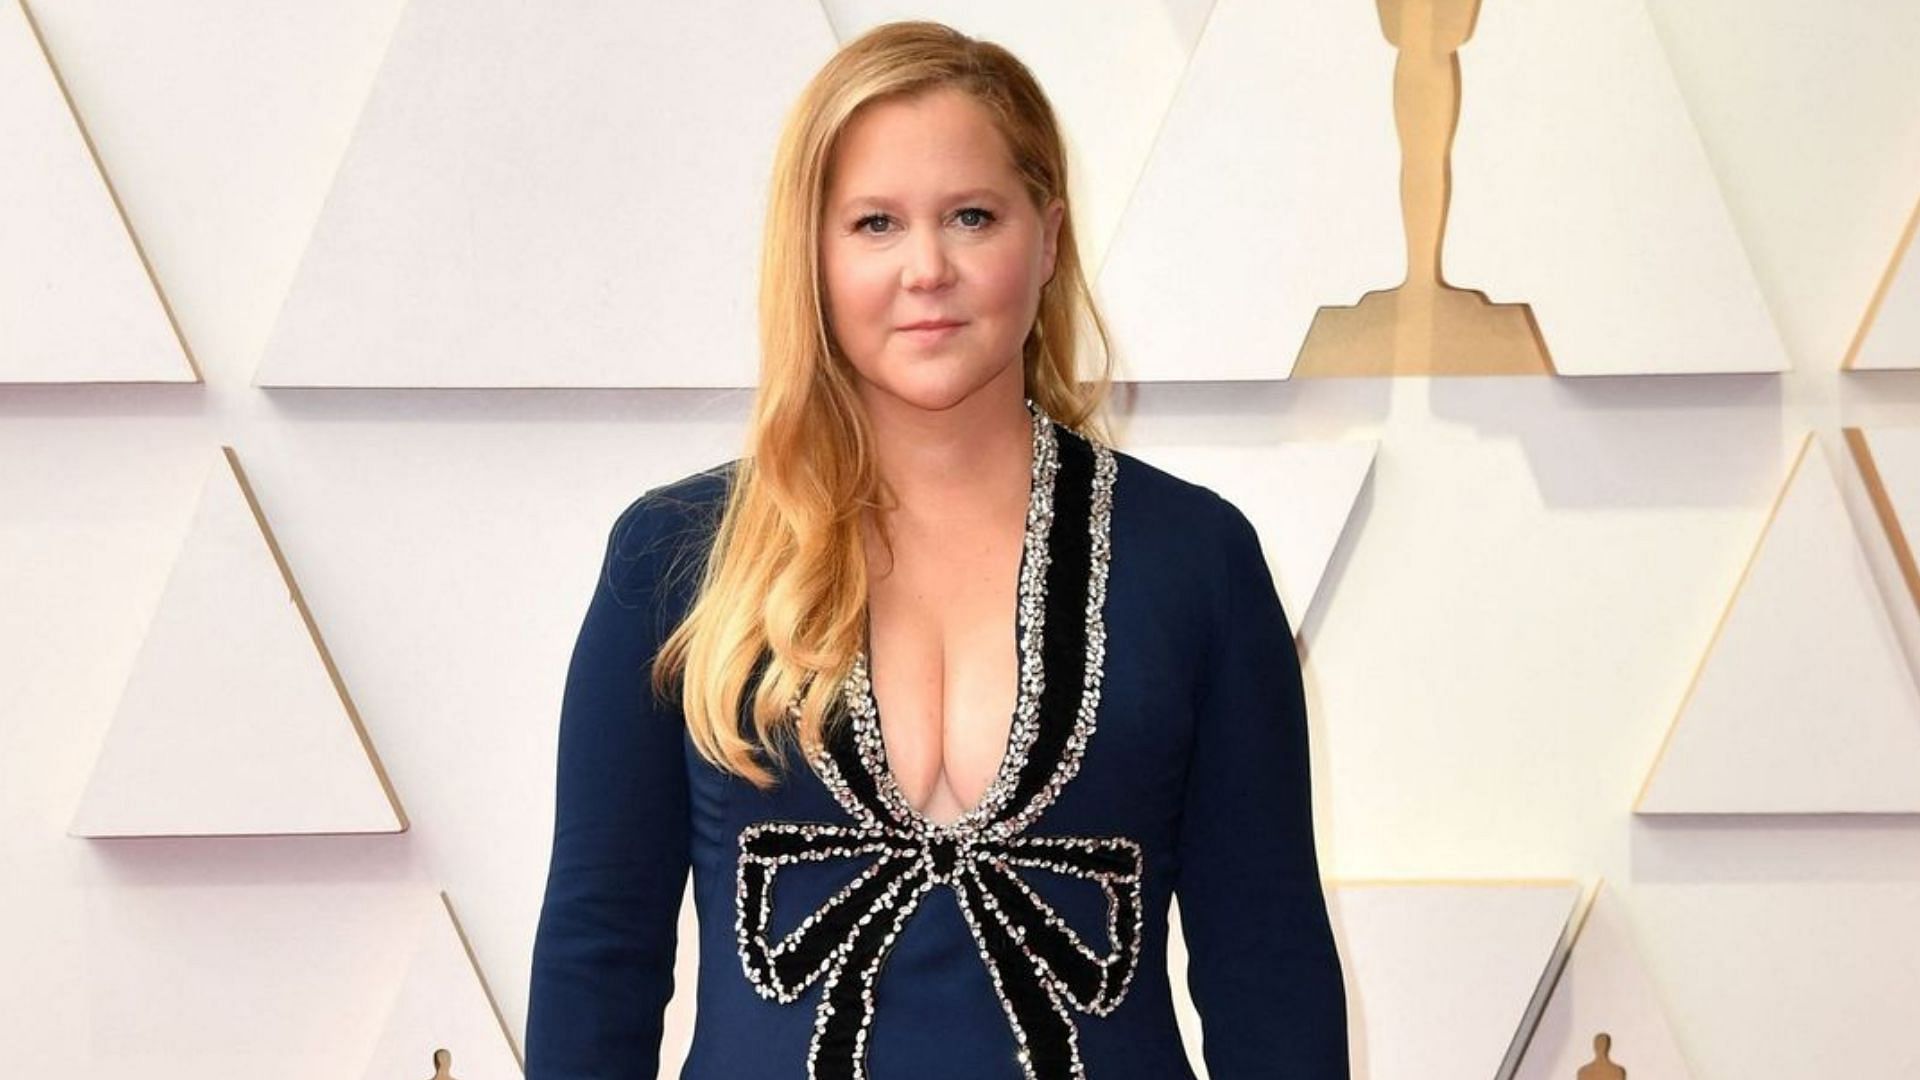 Amy Schumer was one of the hosts at the Oscars 2022 (Image via theacademy/Instagram)